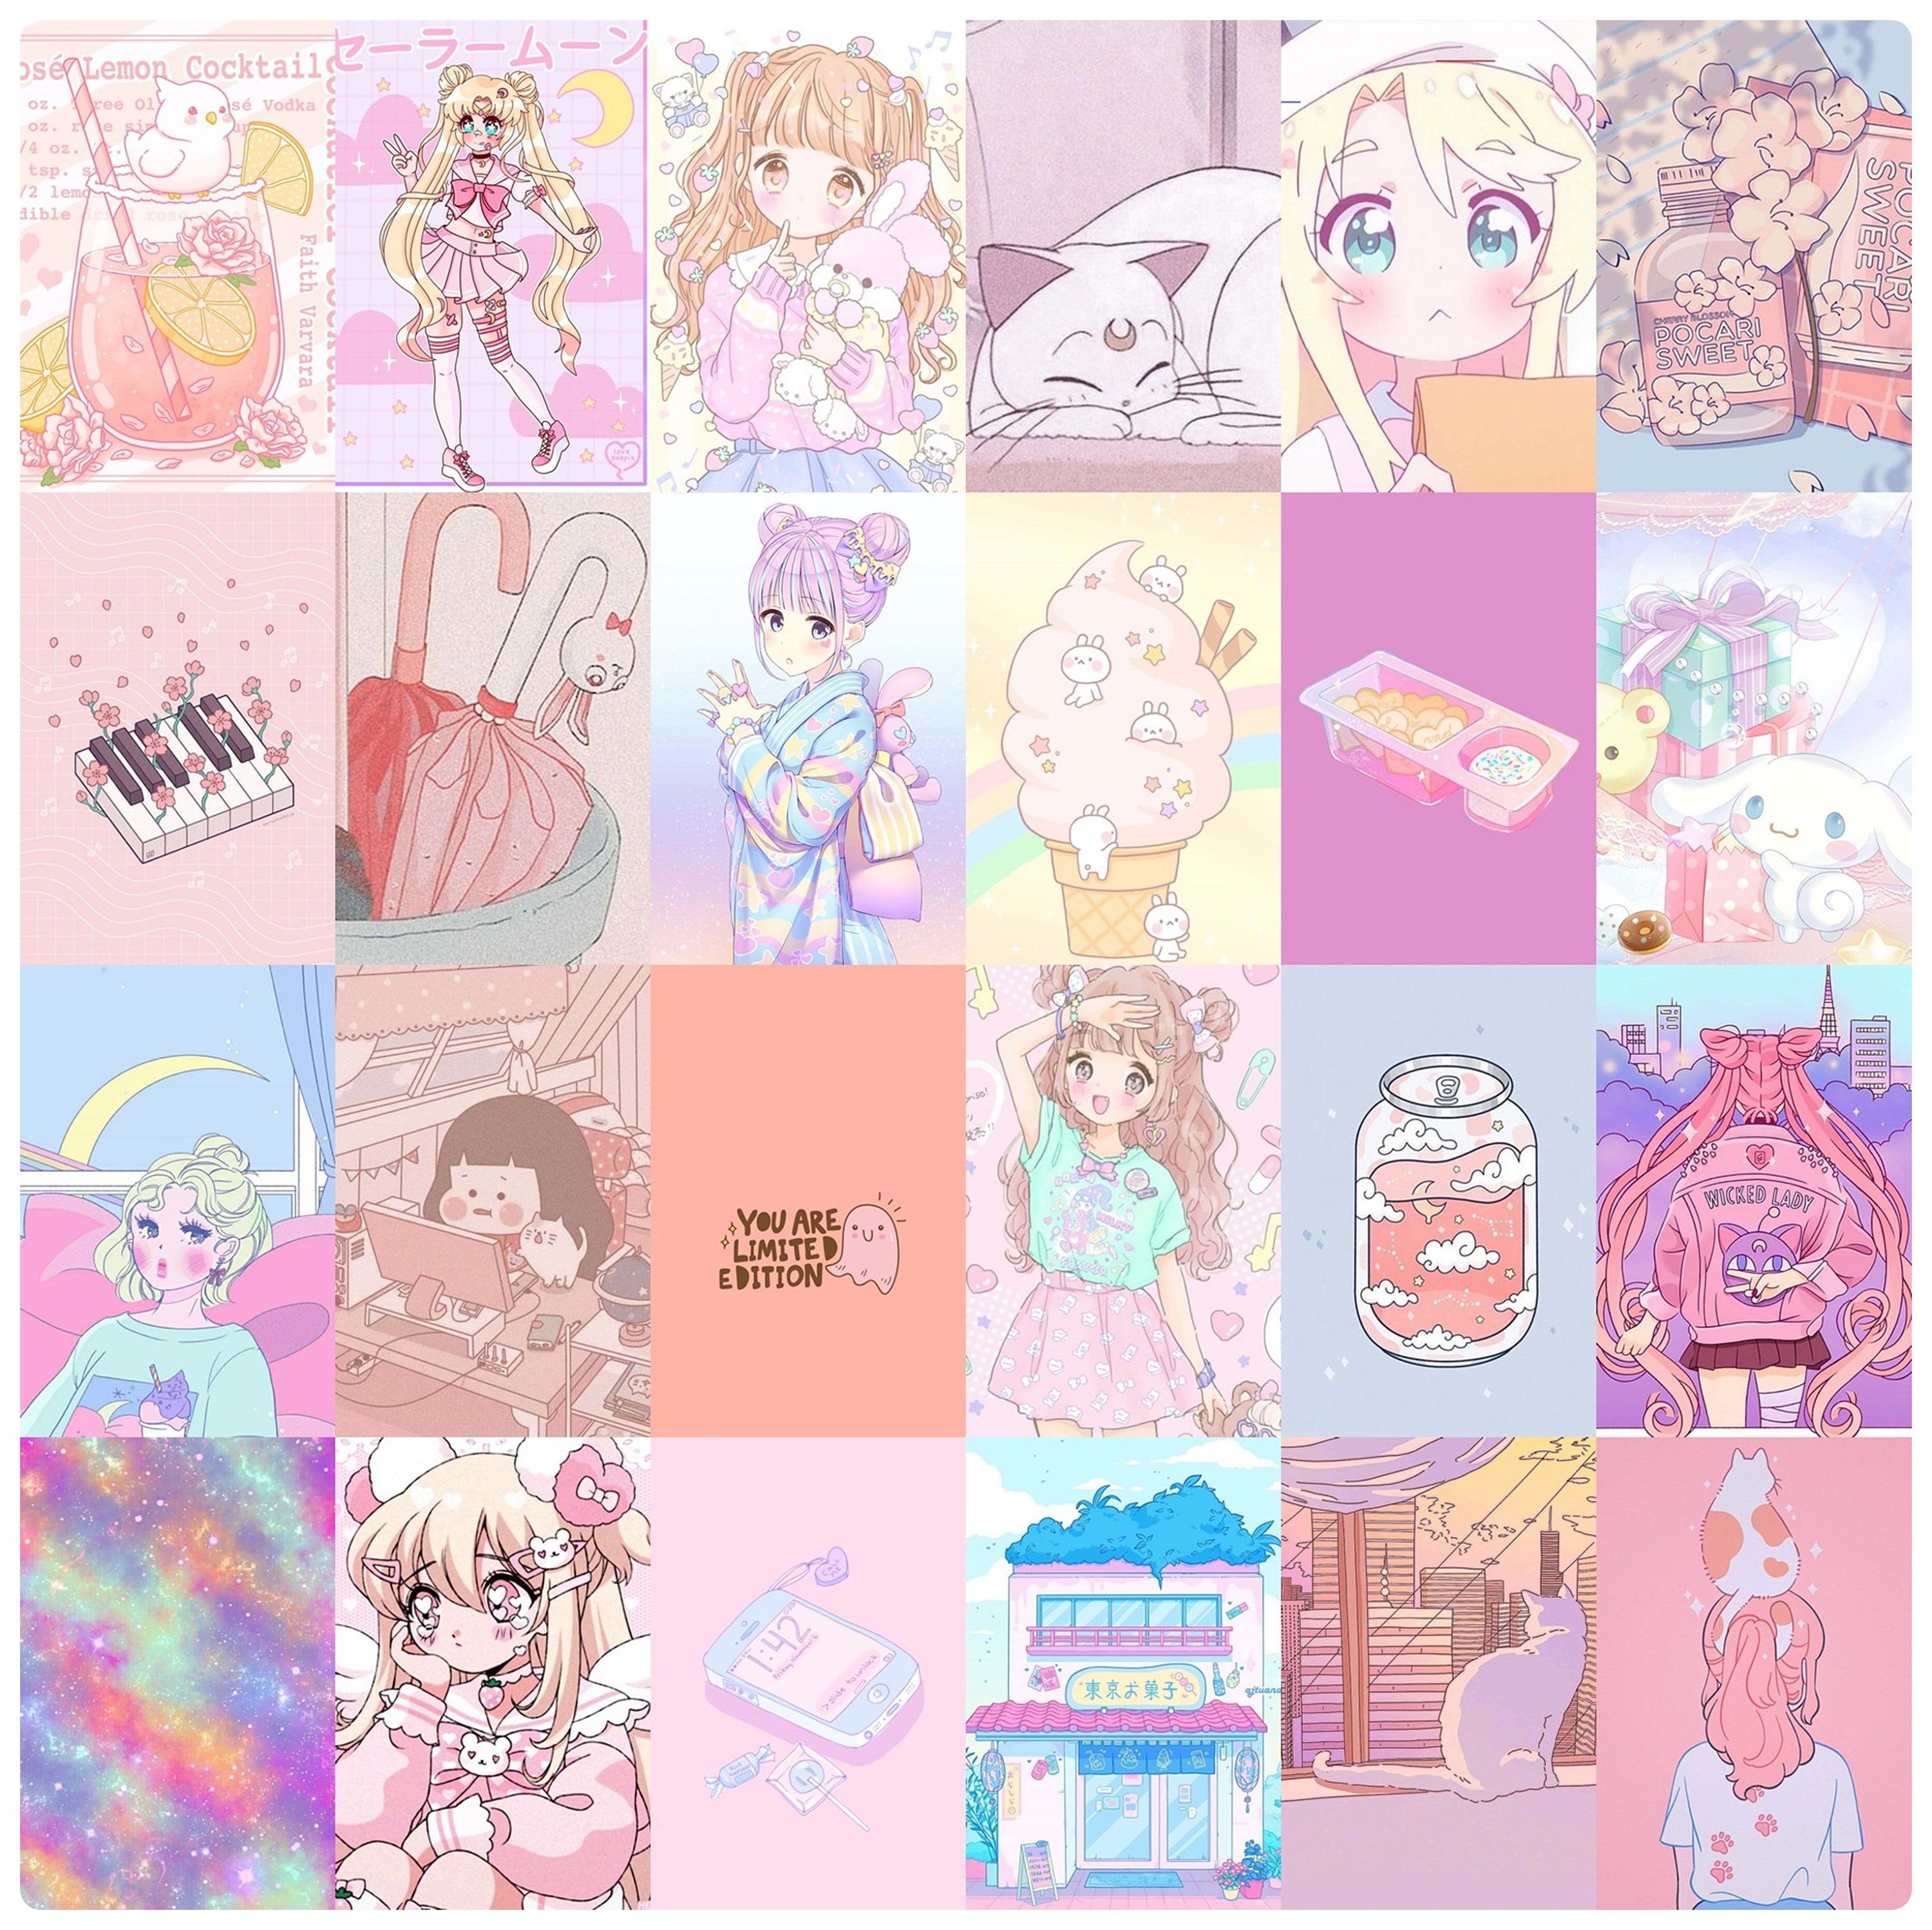 Aesthetic background of different anime characters and objects. - Kawaii